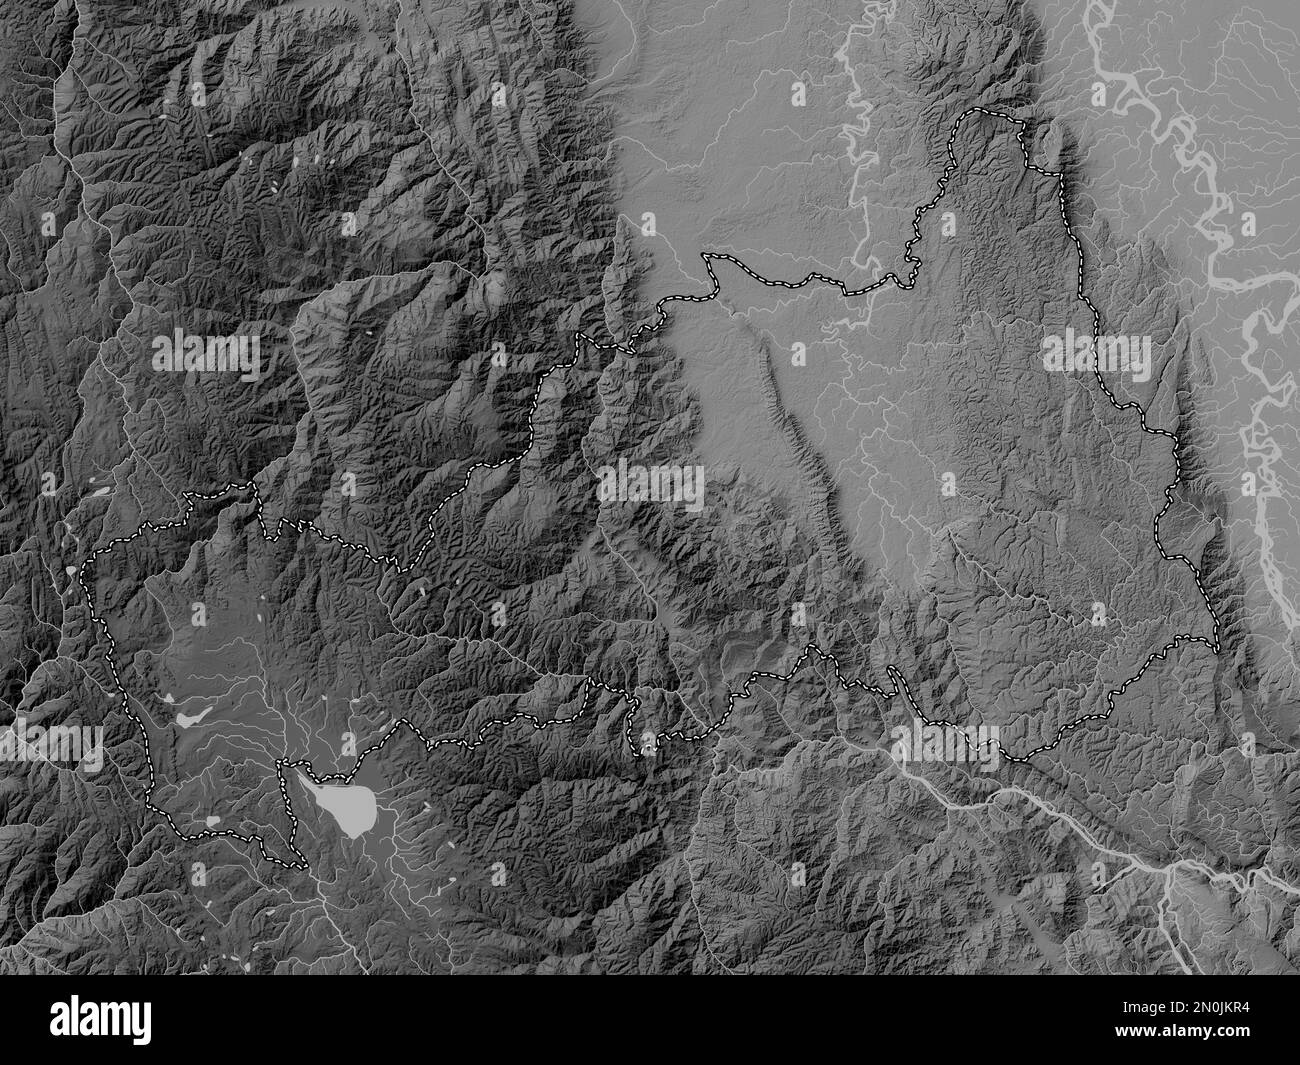 Pasco, region of Peru. Grayscale elevation map with lakes and rivers Stock Photo